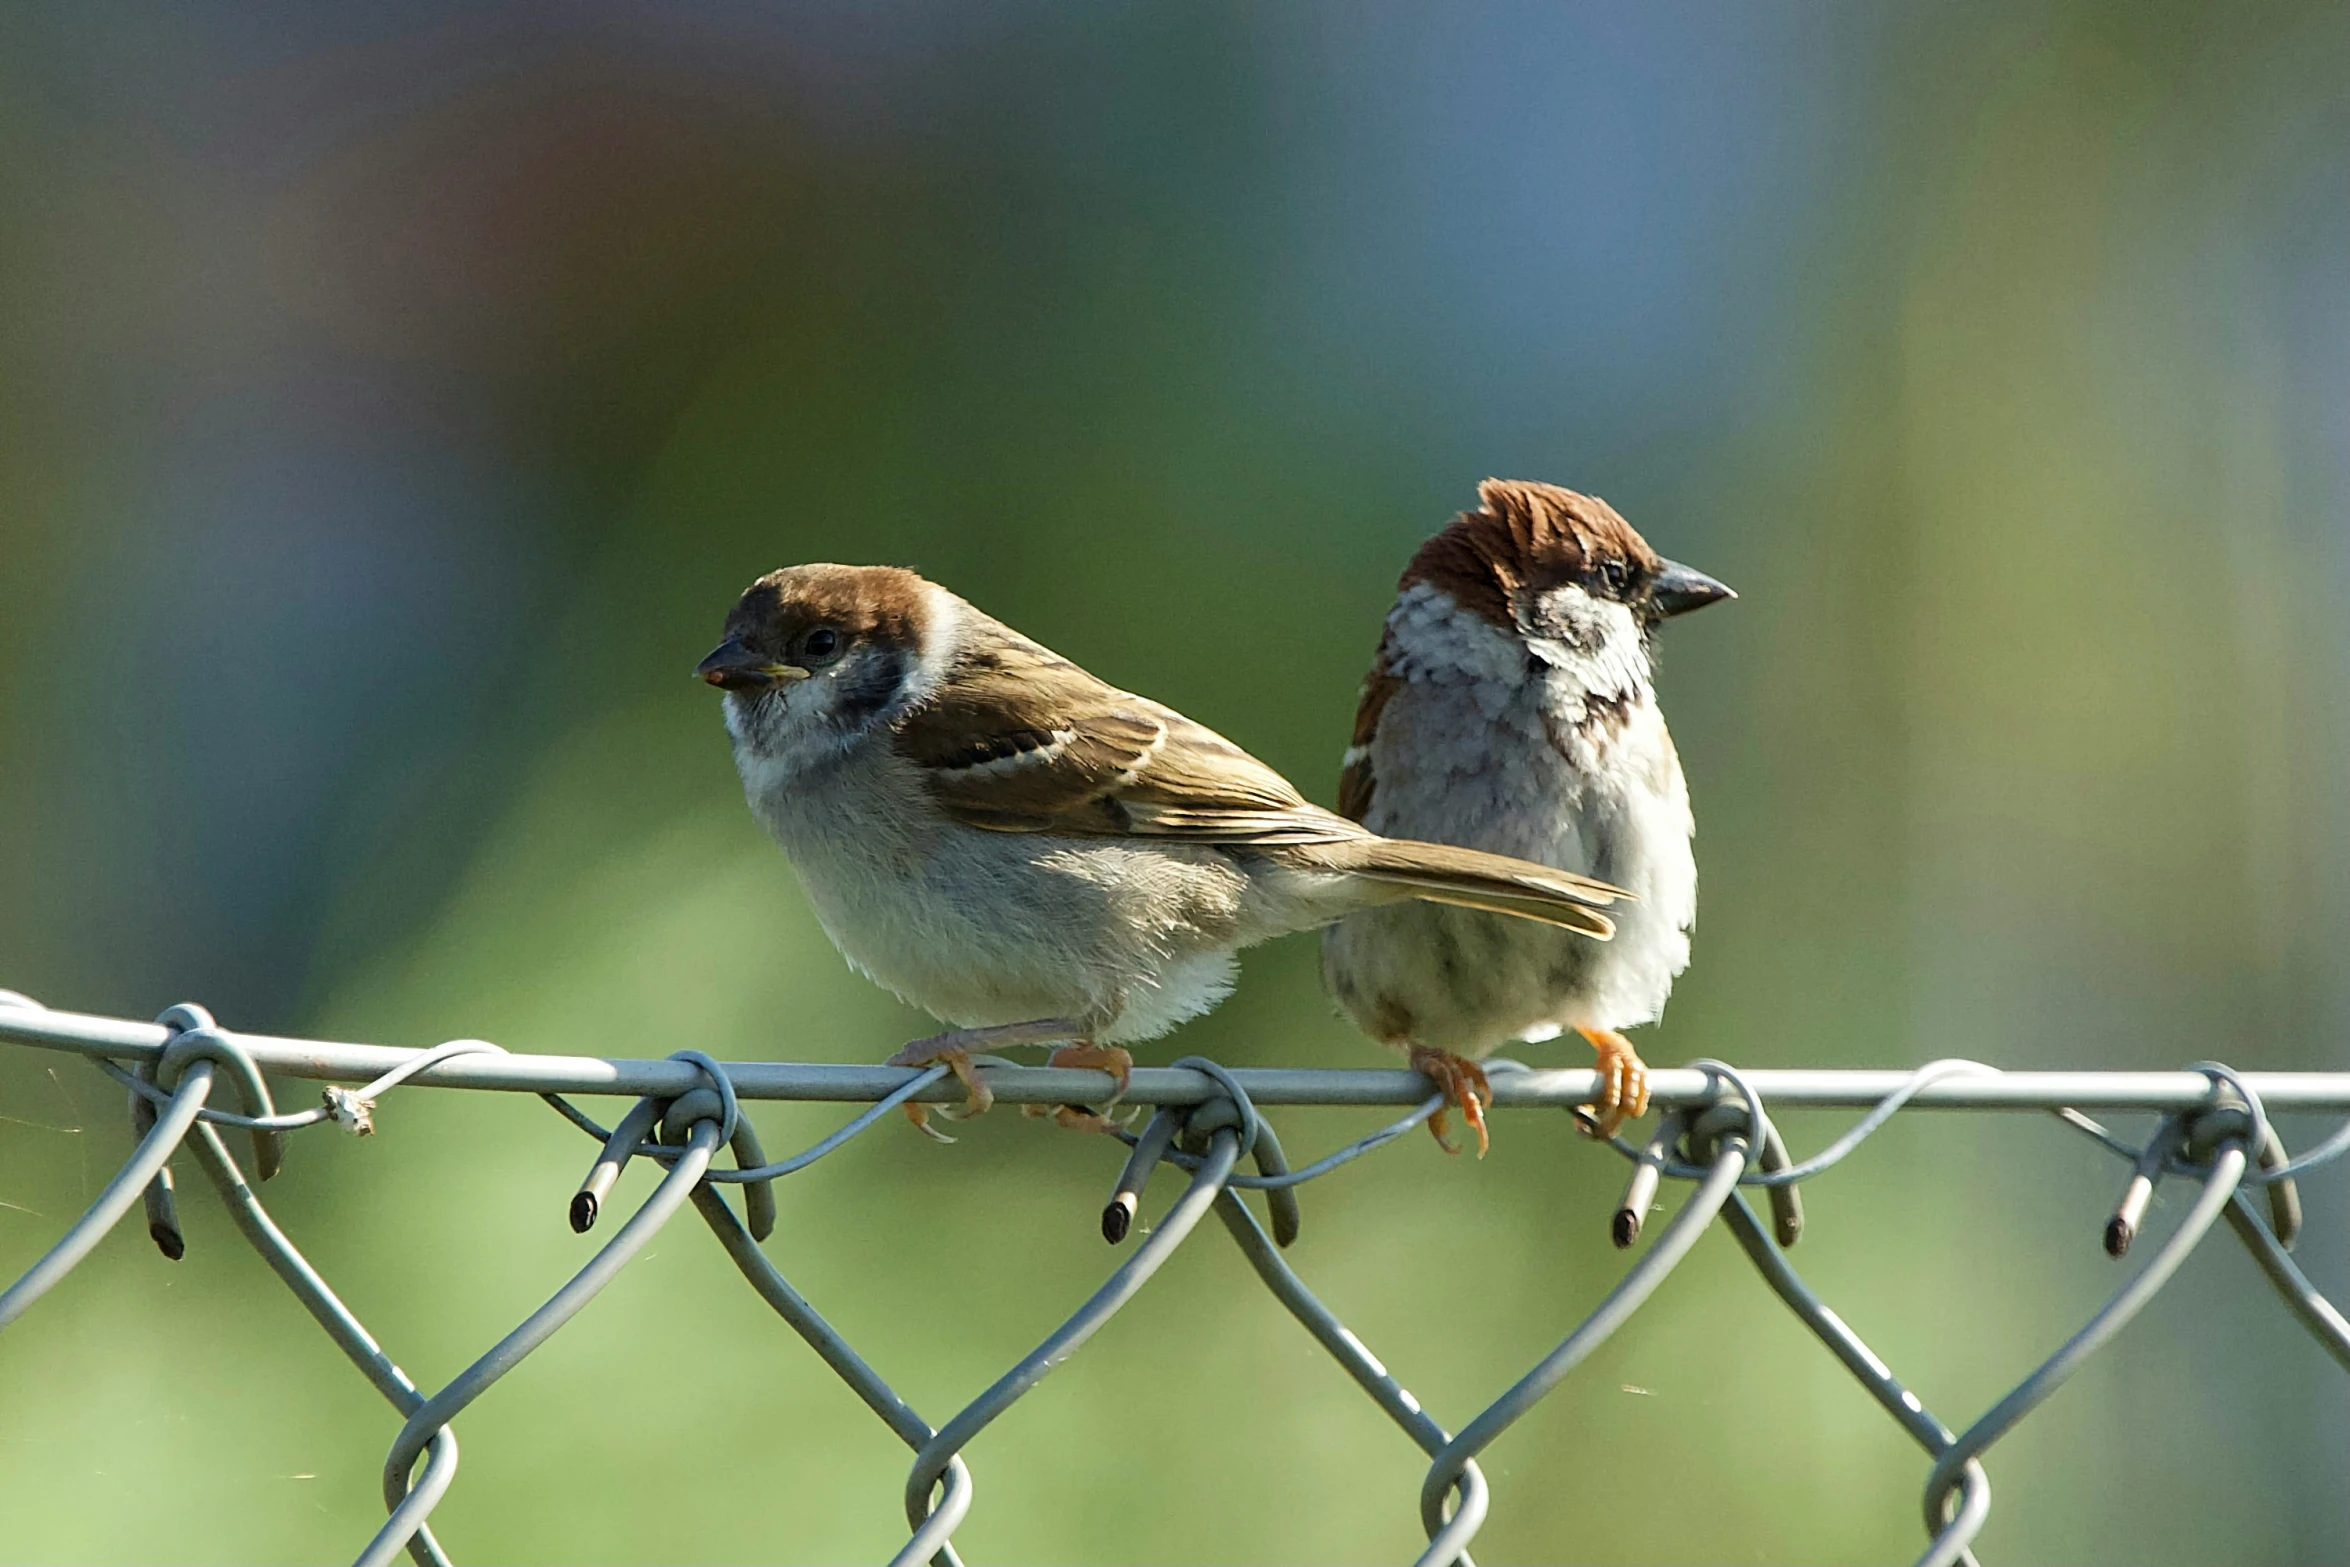 two sparrows are perched on the barb wire fence